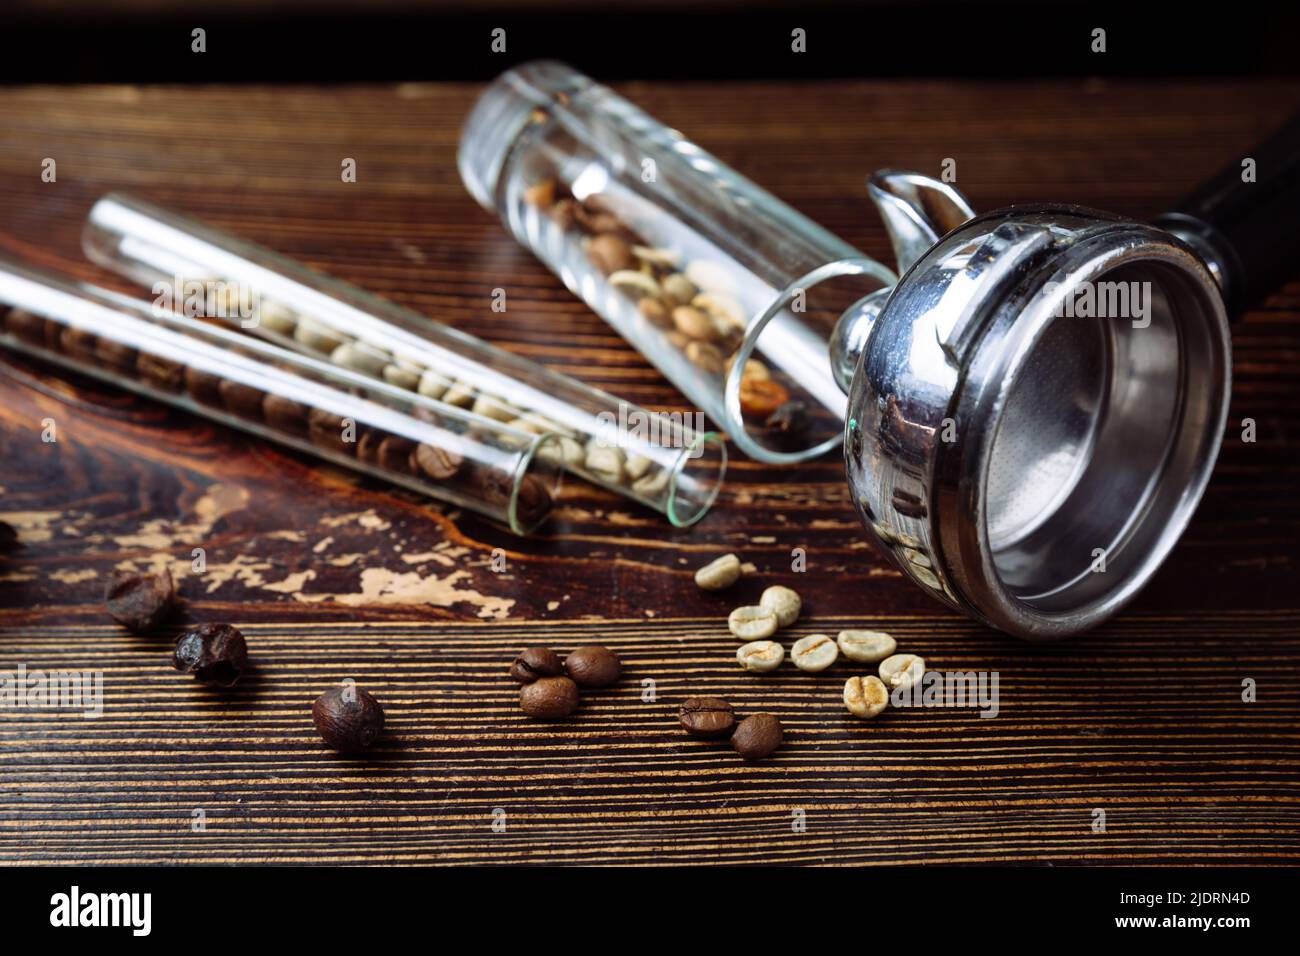 Tool for making professional espresso coffee and coffee beans on a wooden background Stock Photo